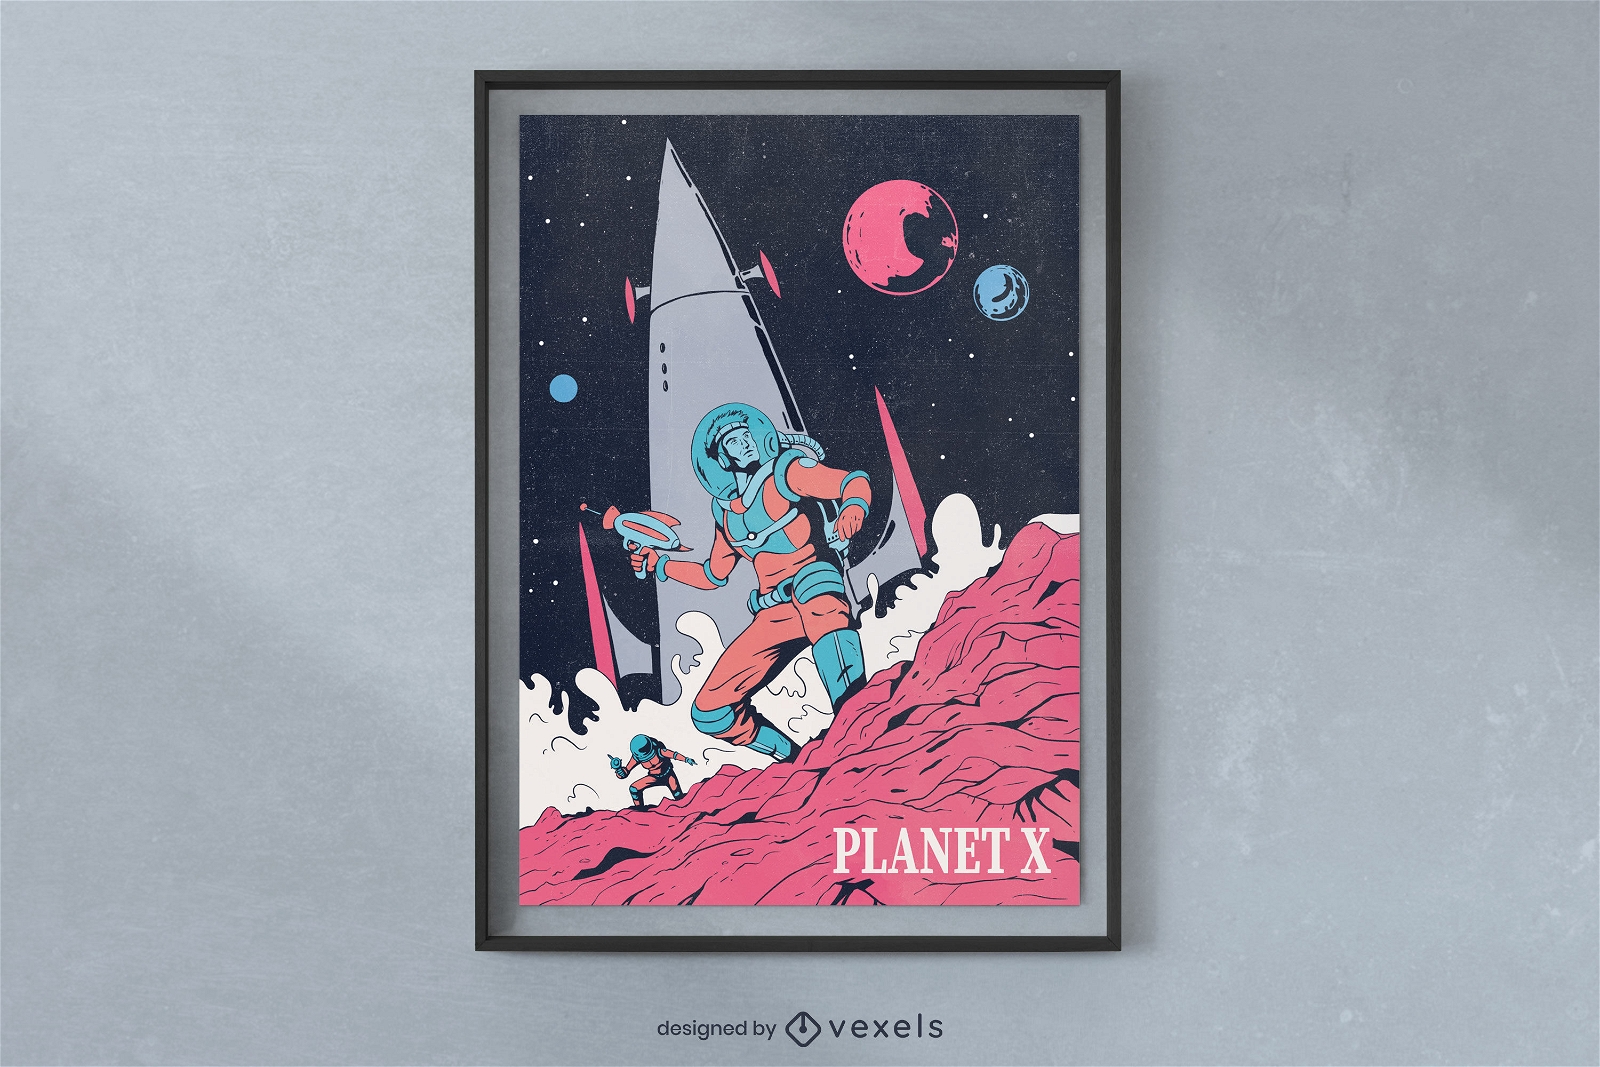 Astronaut in planet in space poster design